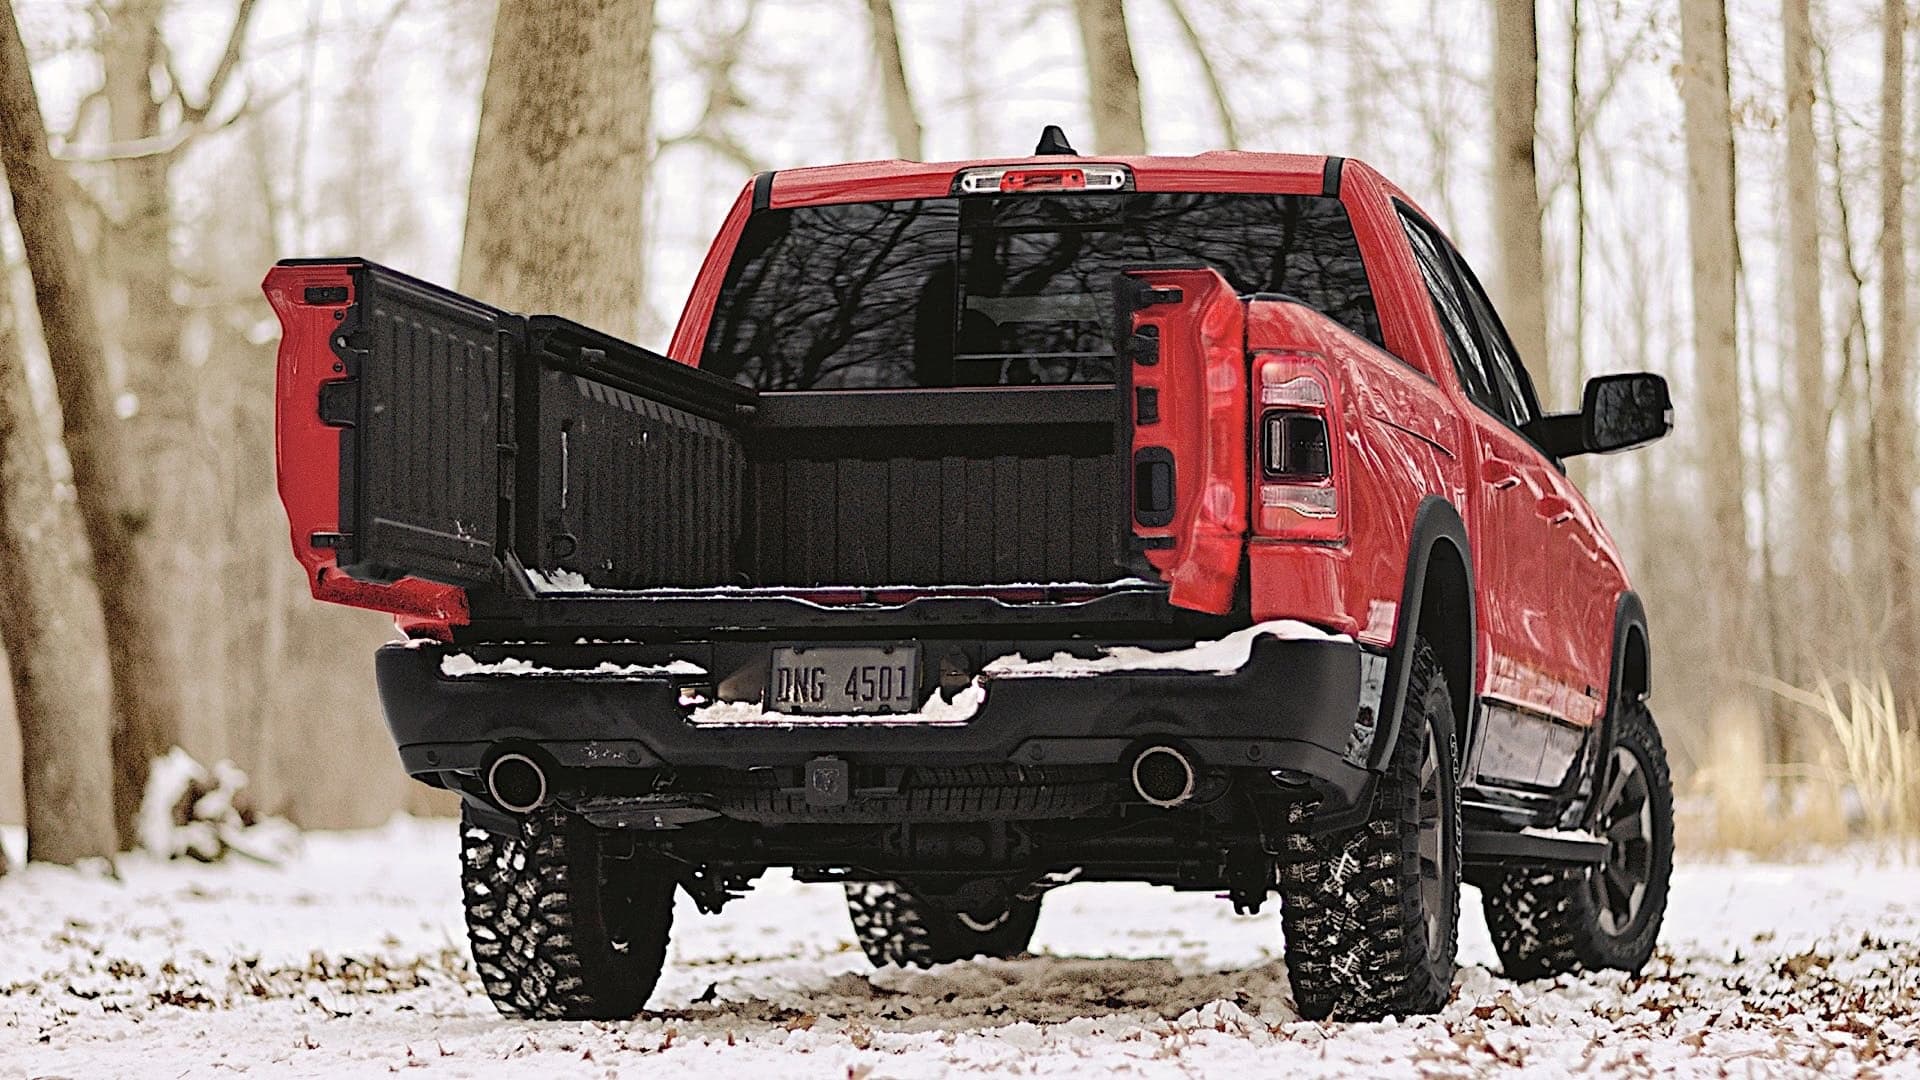 Ram 1500 Takes a Swing at GMC Sierra With Its Own Multifunction Tailgate